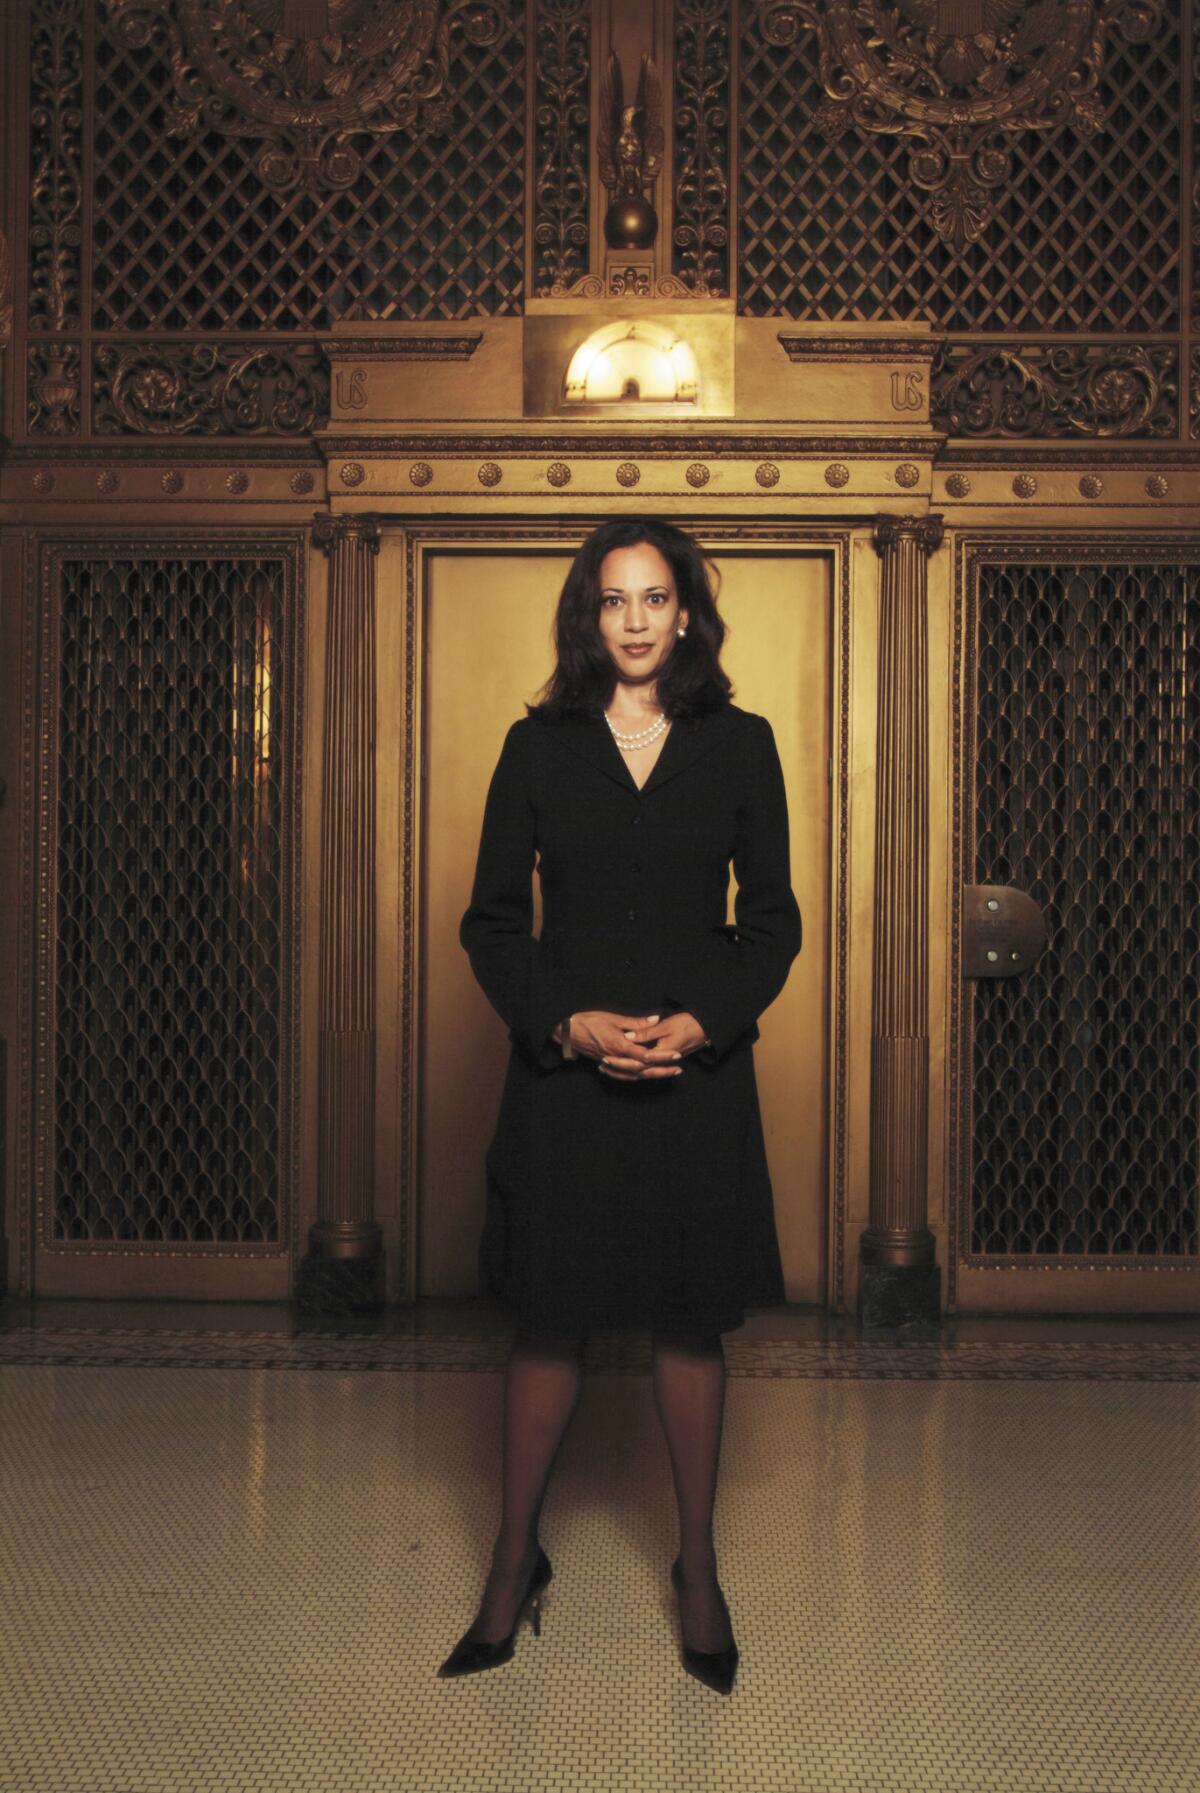 Kamala Harris in 2004, the newly elected San Francisco District Attorney. (Jay and Ani / For The Times)